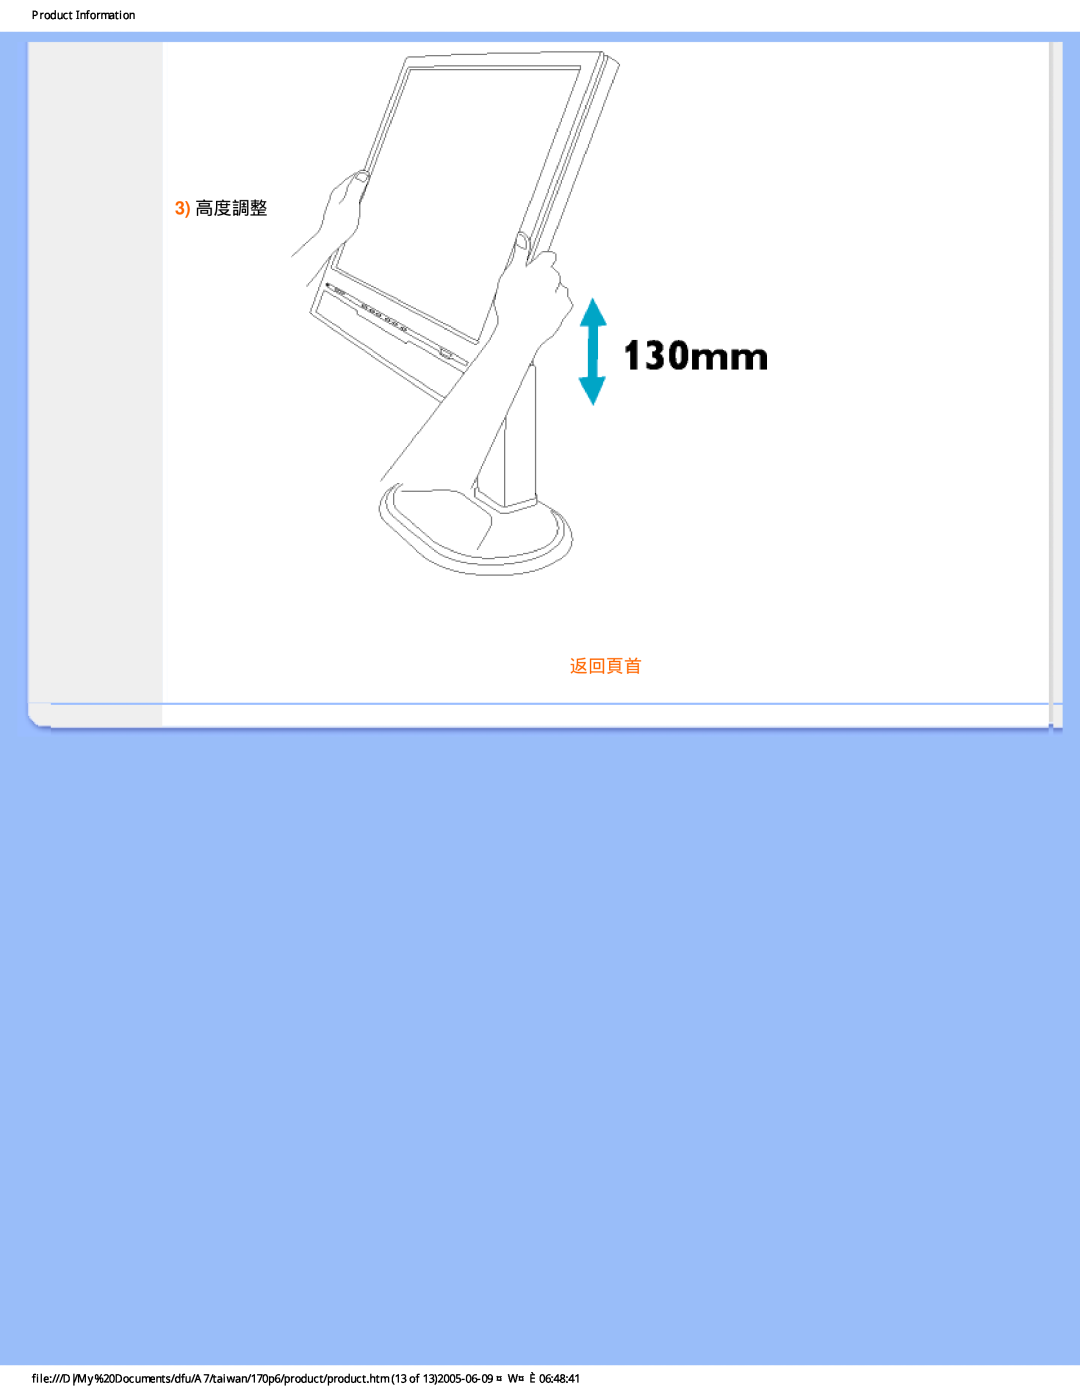 Philips R6RY0 user manual 3 高度調整, 返回頁首, Product Information 